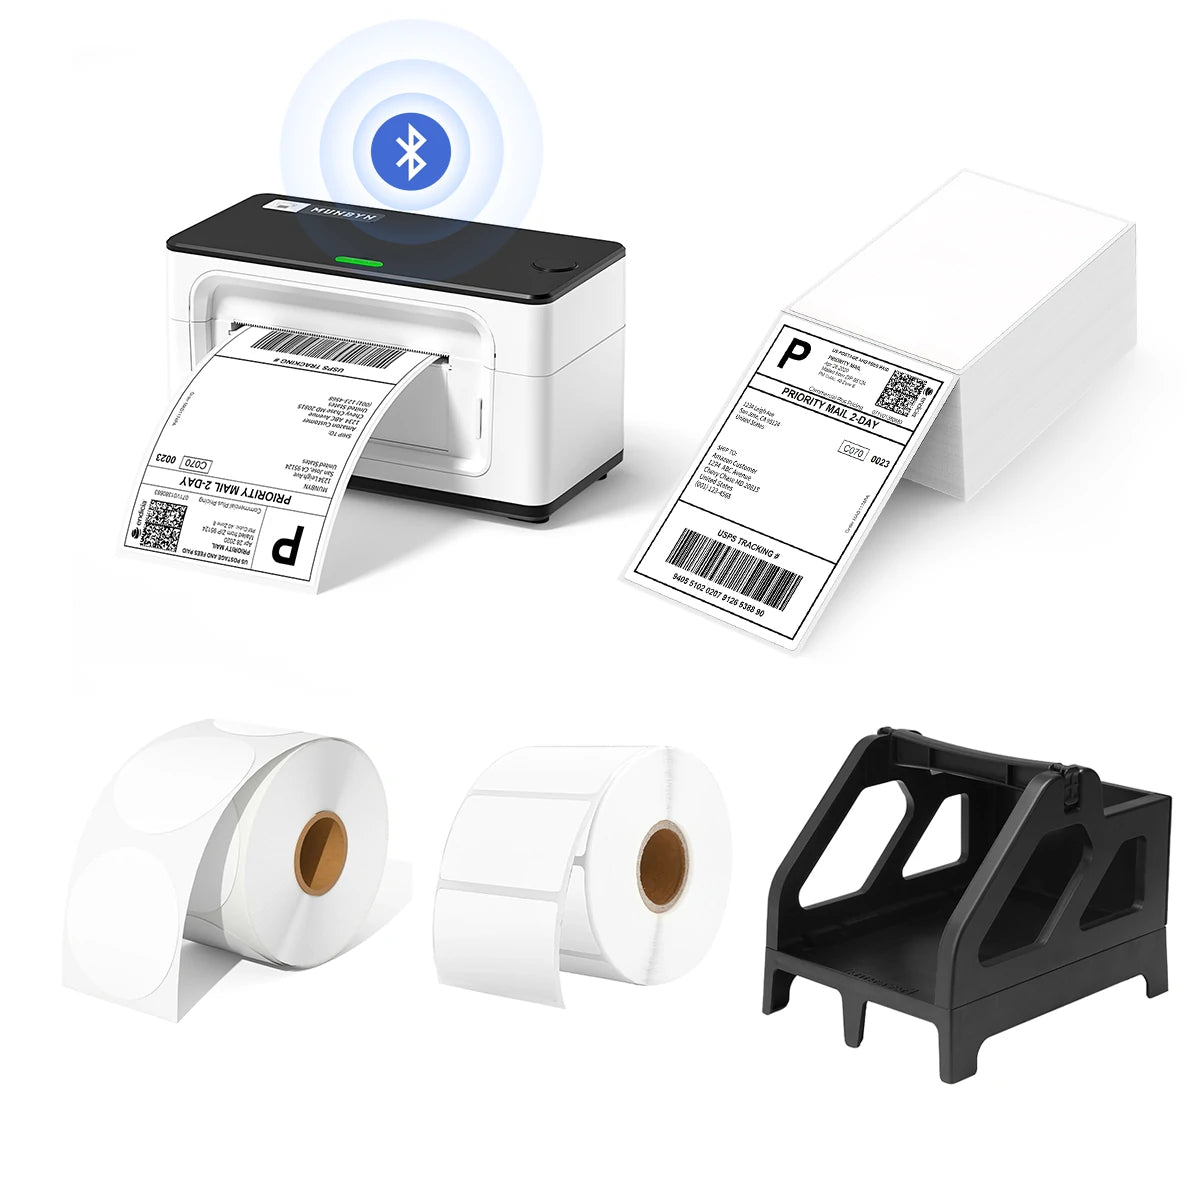 MUNBYN P941B white printer kit includes a label printer, a balck label holder, two rolls of blank labels and a stack of shipping labels.